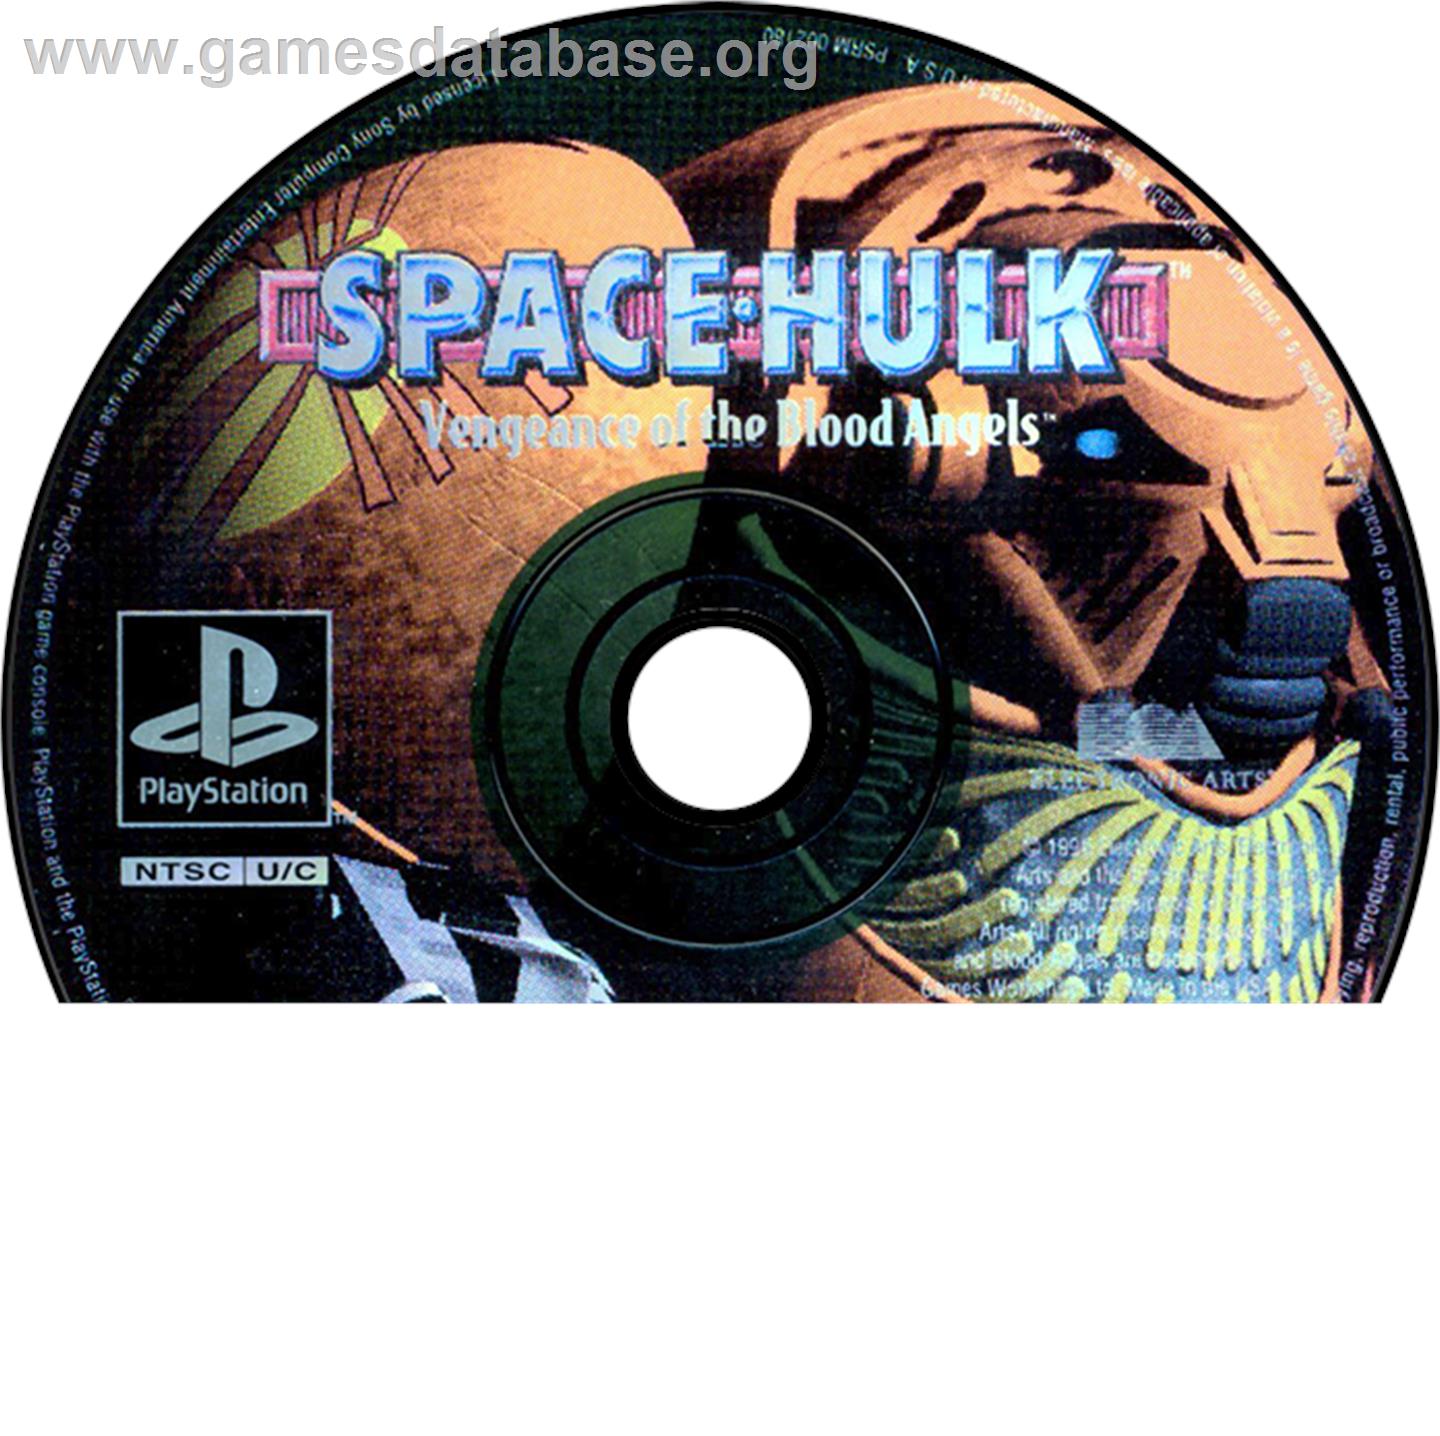 Space Hulk: Vengeance of the Blood Angels - Sony Playstation - Artwork - Disc